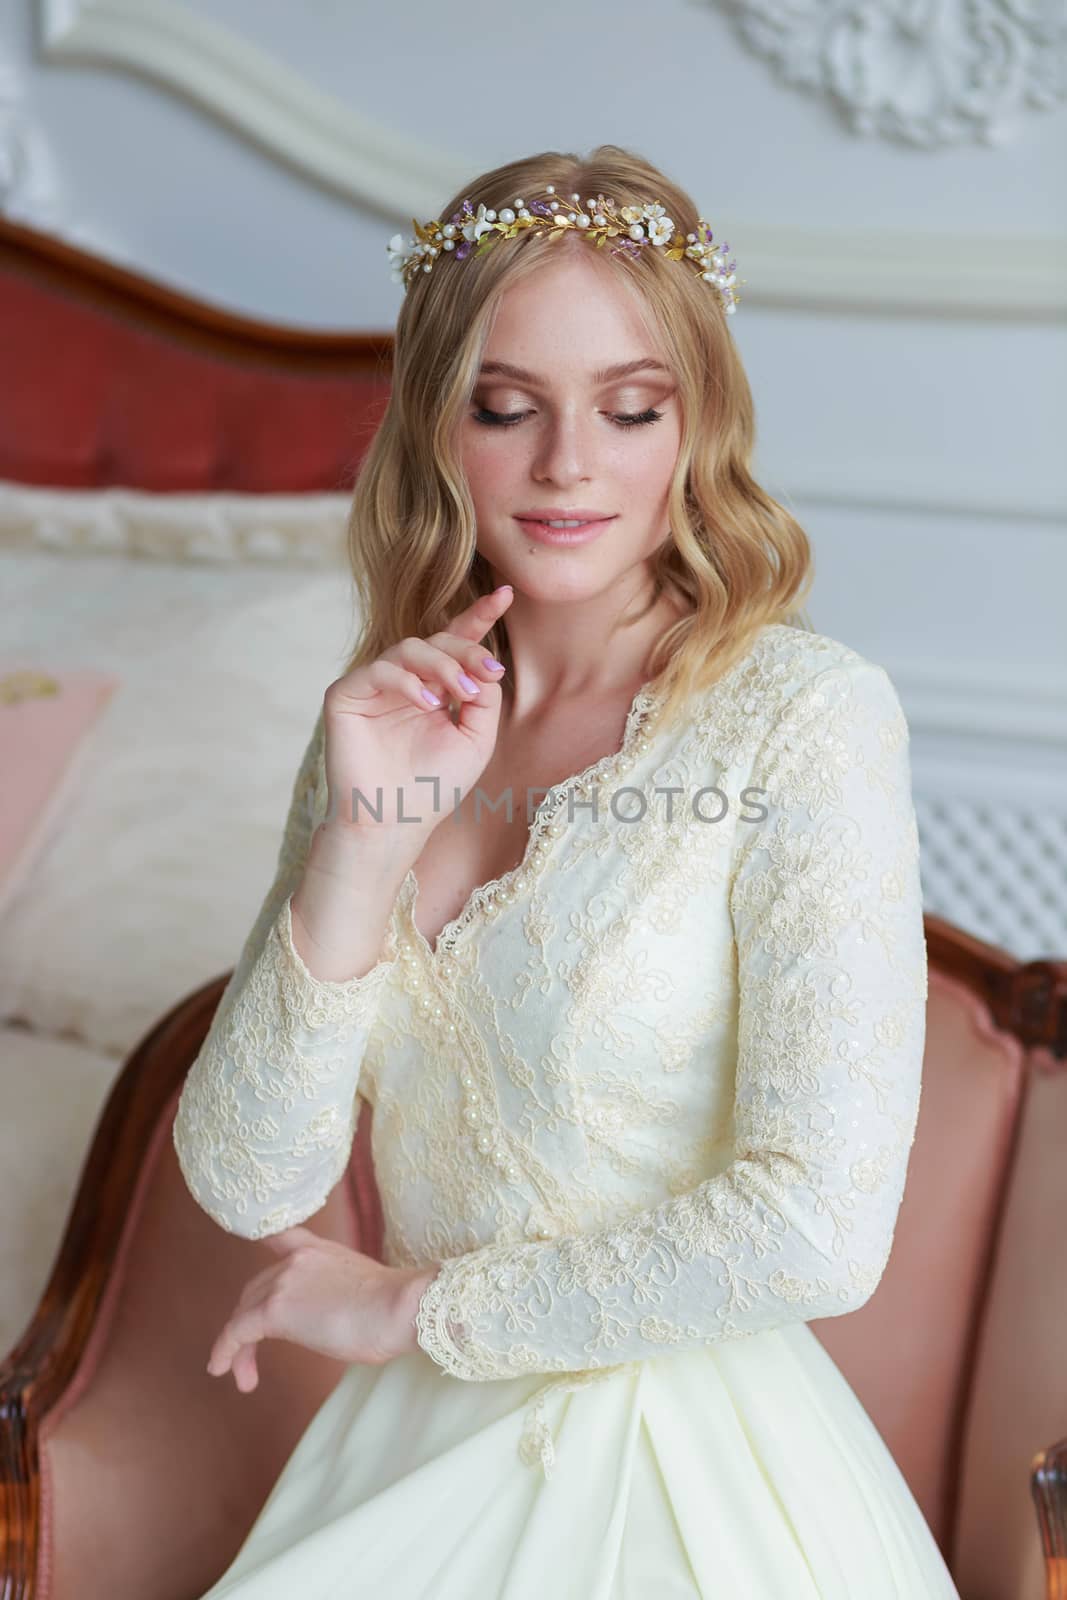 Close-up portrait of a beautiful bride on a wedding day sitting on an armchair.